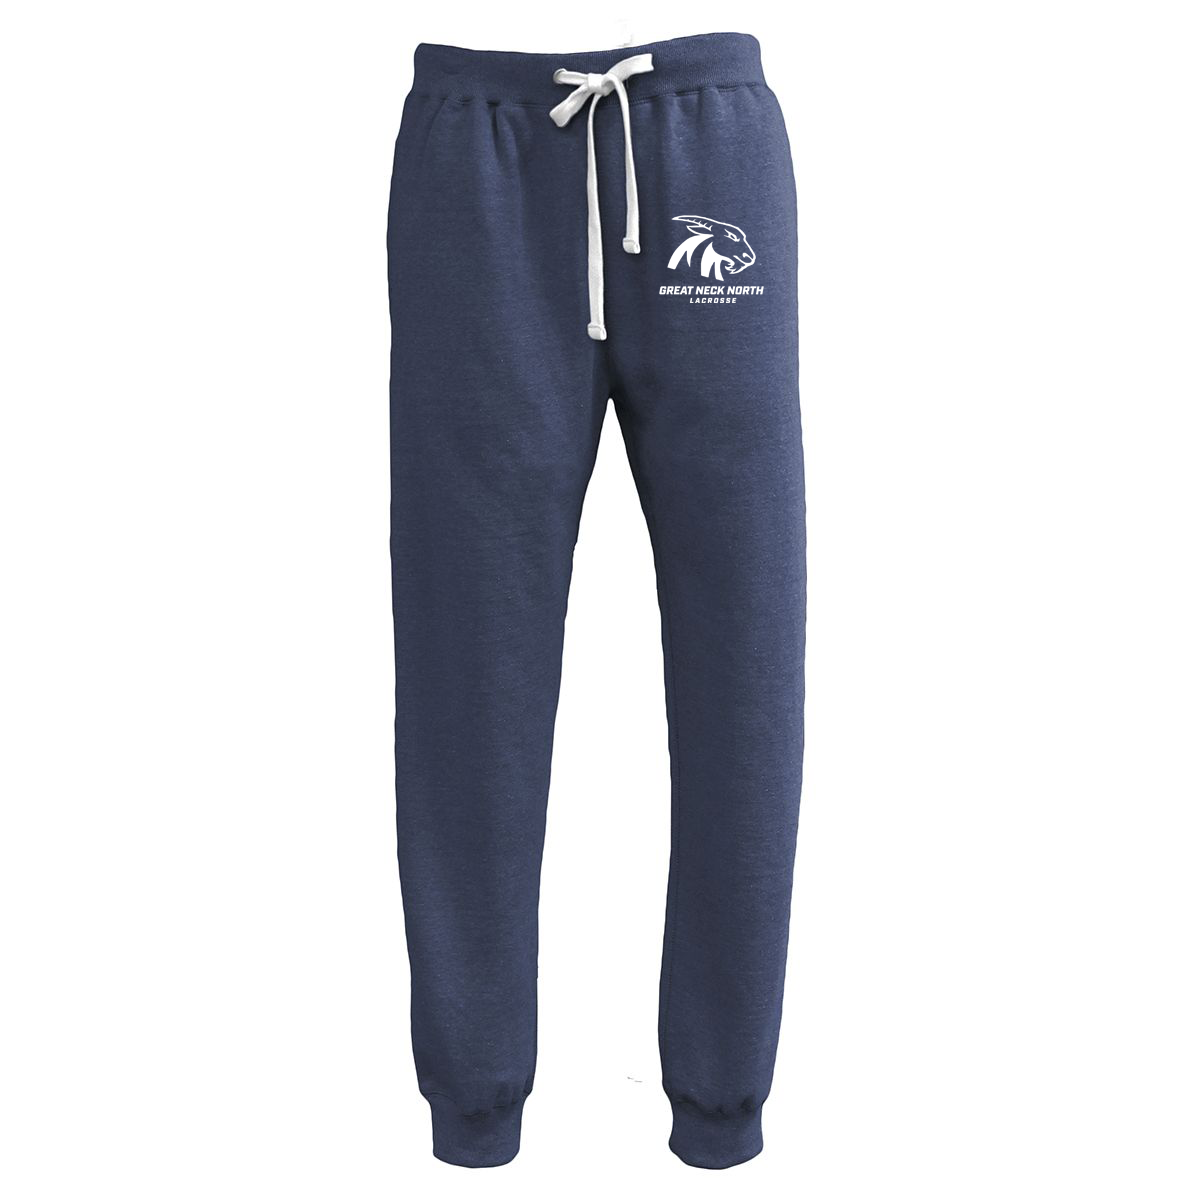 Great Neck North HS Lacrosse Joggers